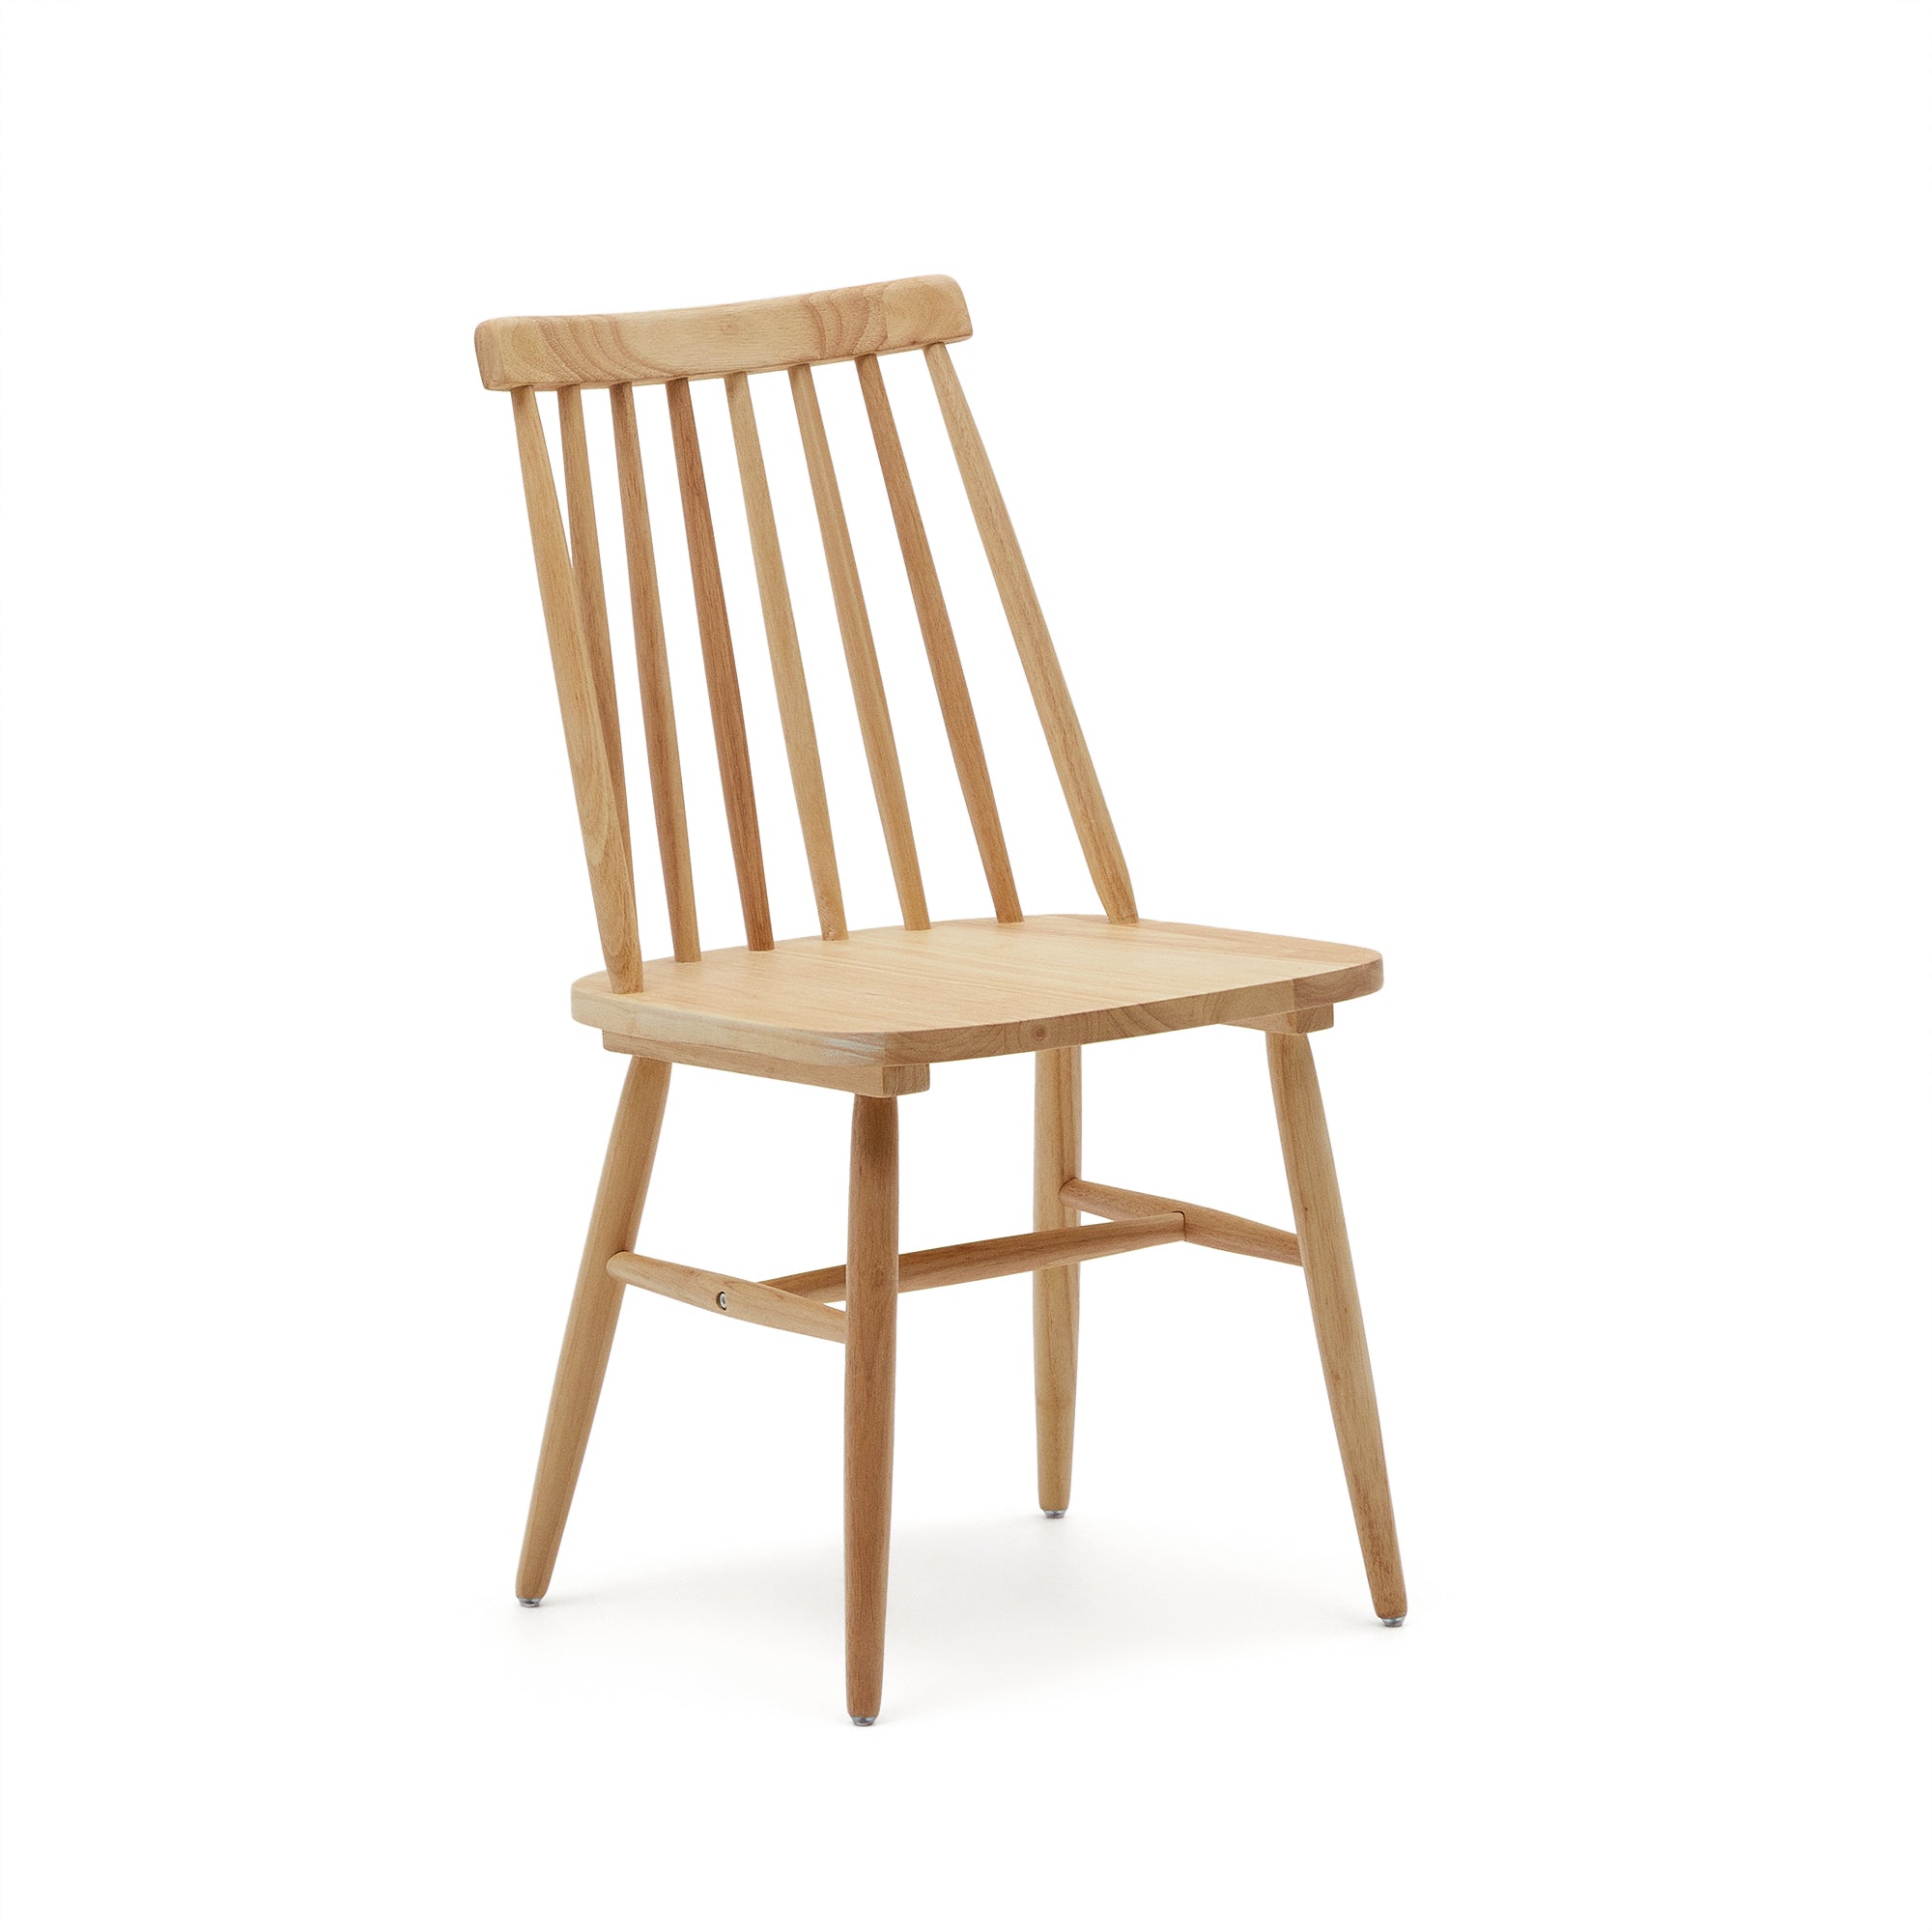 Tressia MDF and solid rubber wood chair with natural lacquer